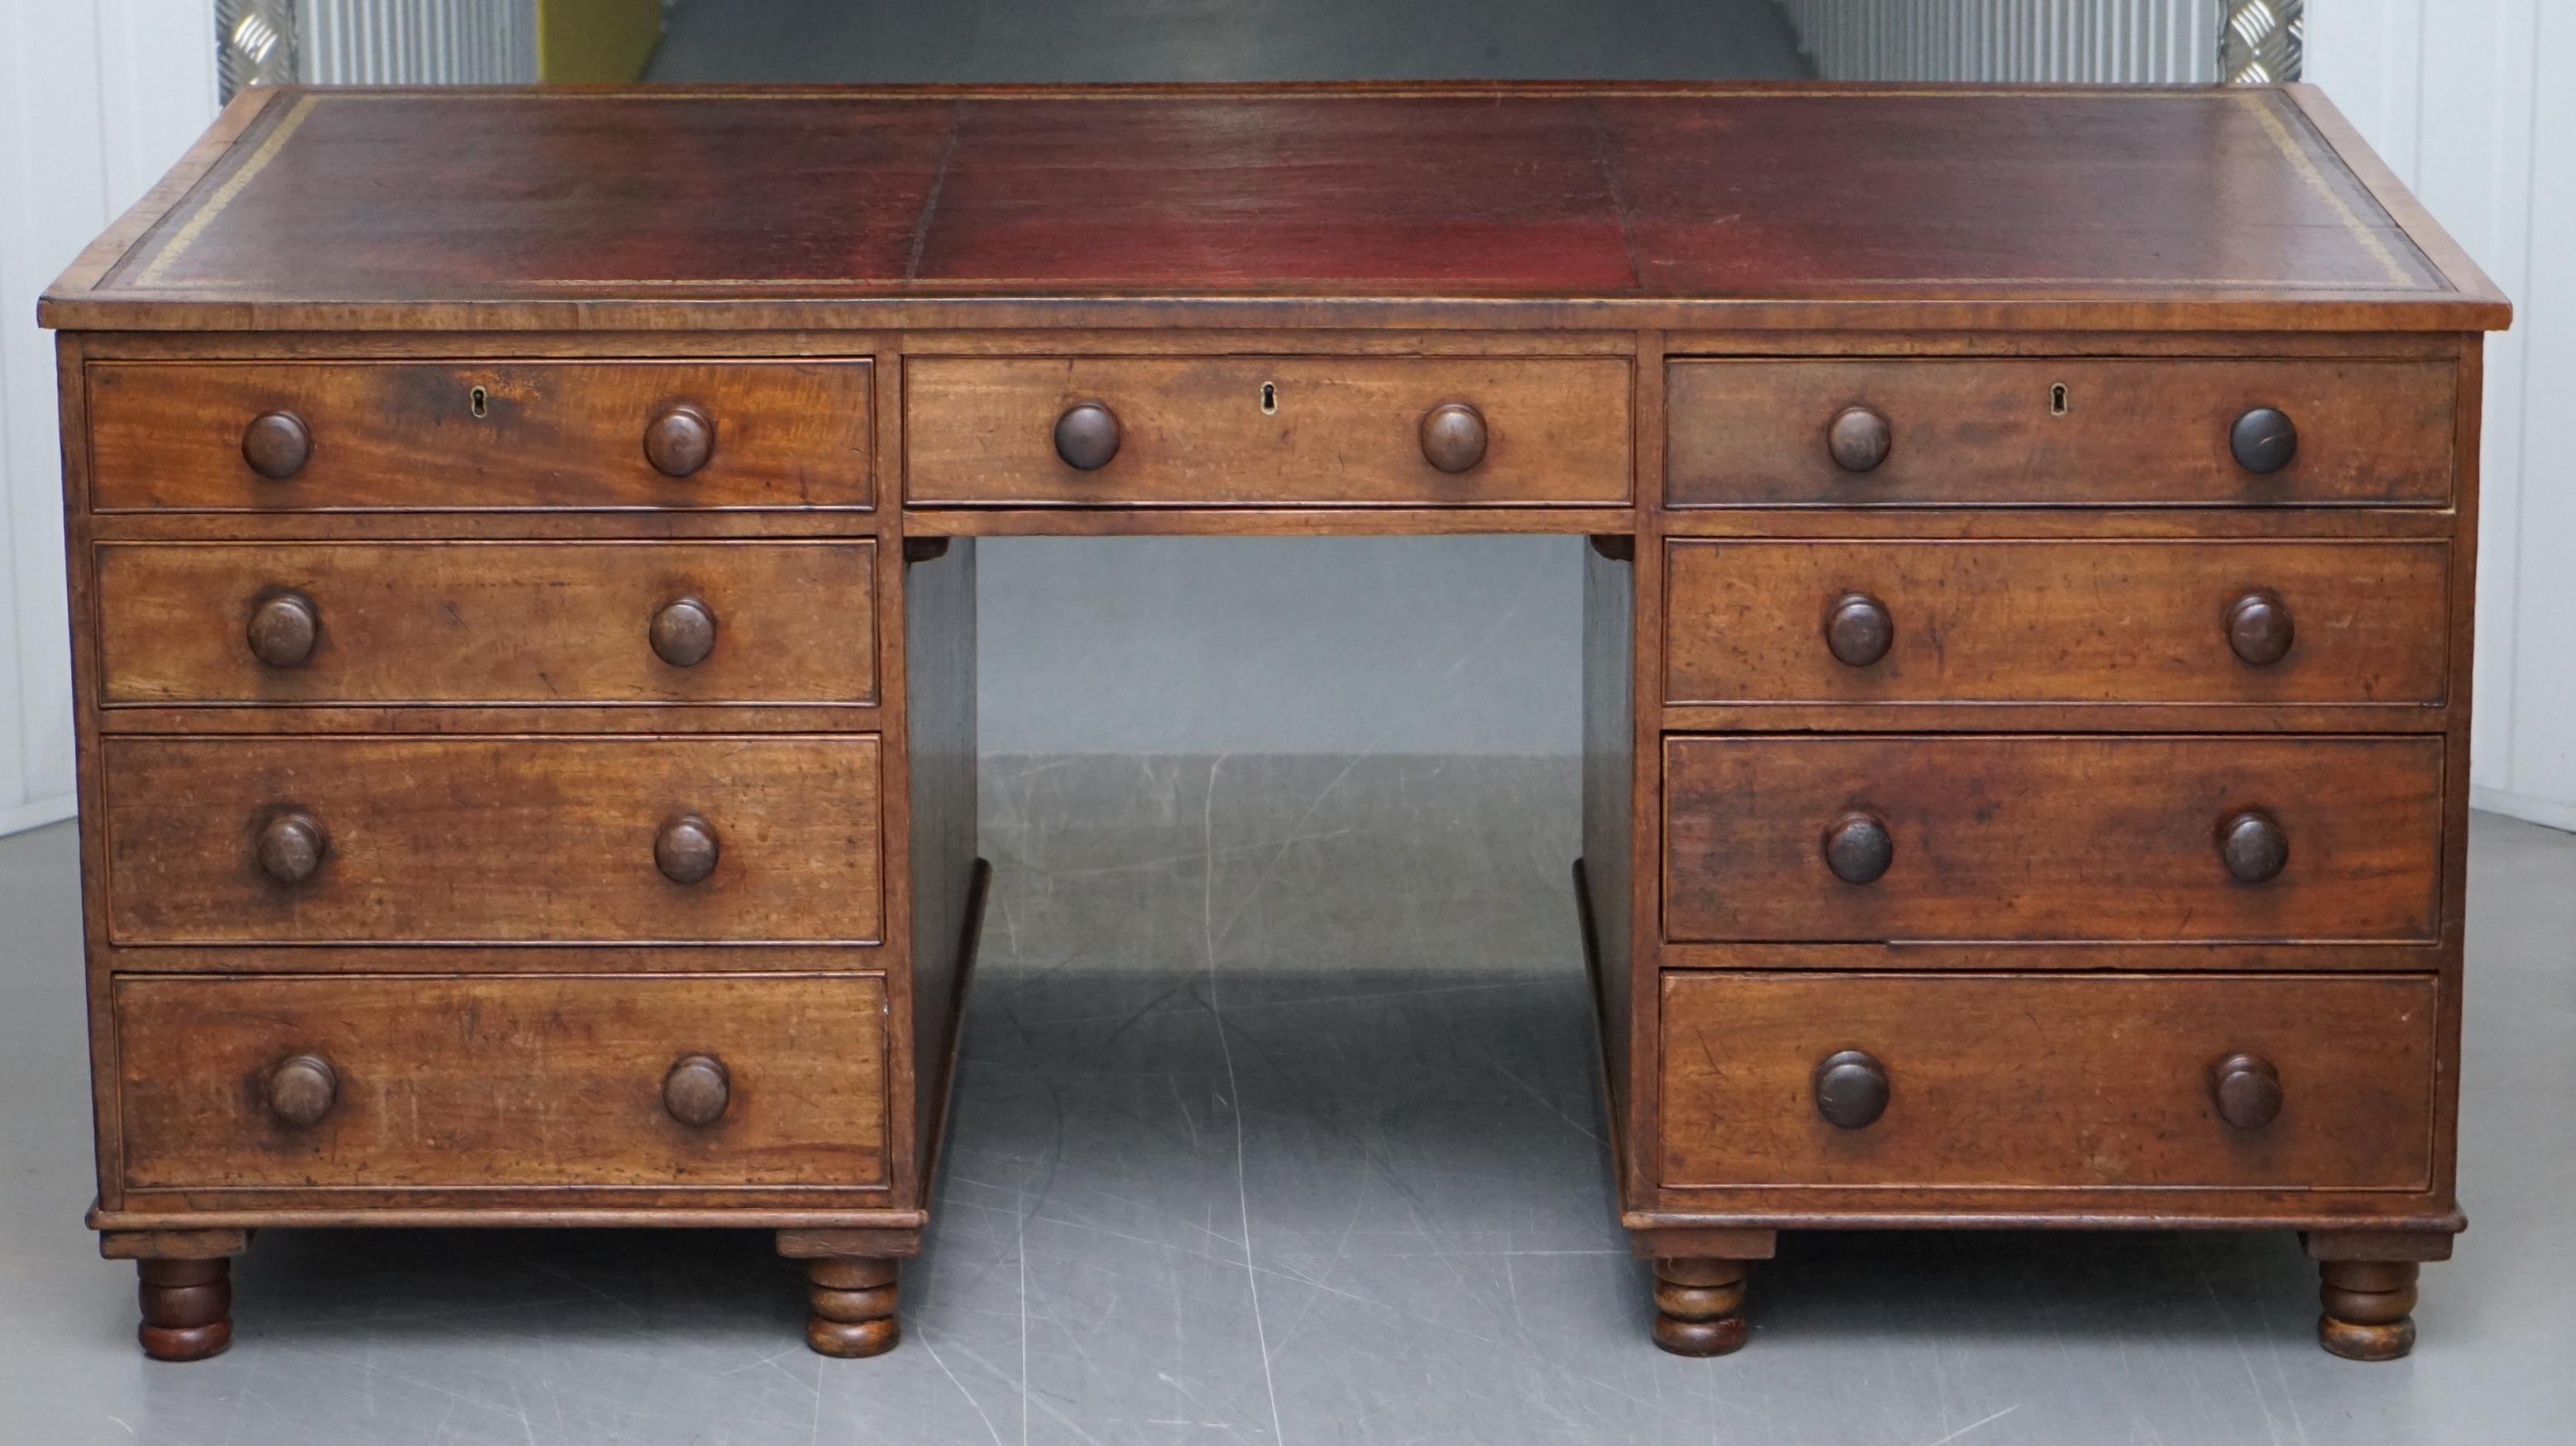 We are delighted to offer for sale this large Victorian twin pedestal 18 drawer double sided mahogany partner desk with oxblood leather top

This desk is a good large size, originally designed as you can see for two people to share, it's rare to